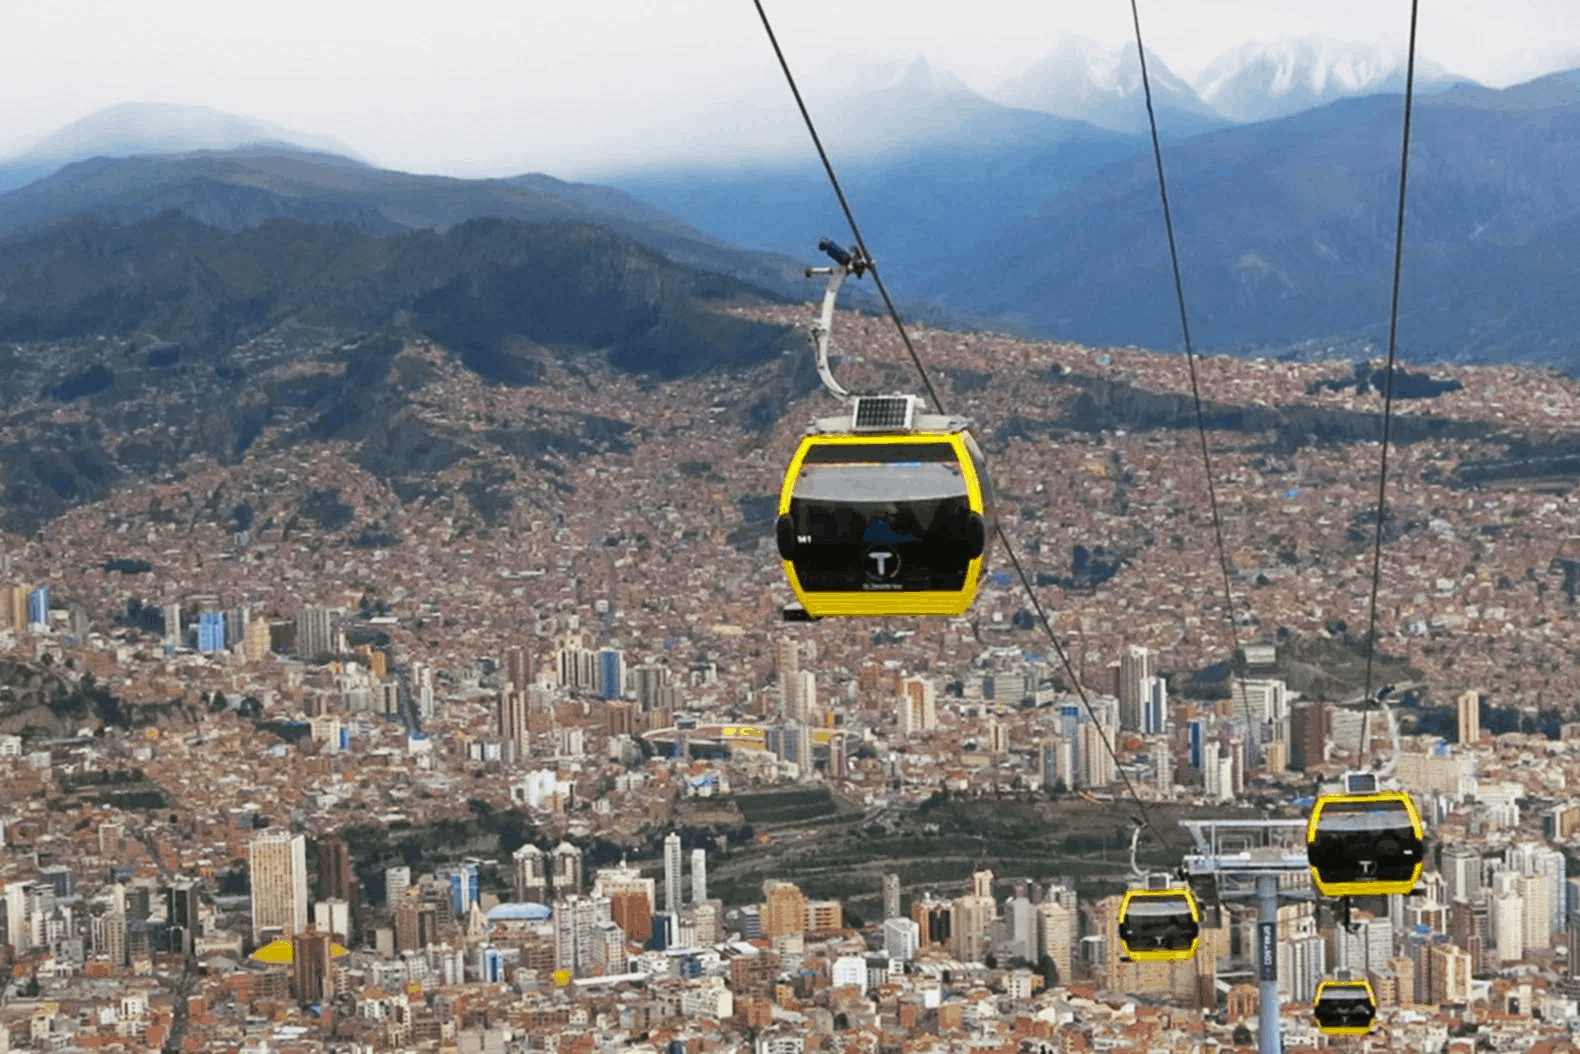 Mi Teleferico cable car opens the whole Andes sightseeing trip from above (collectibles)